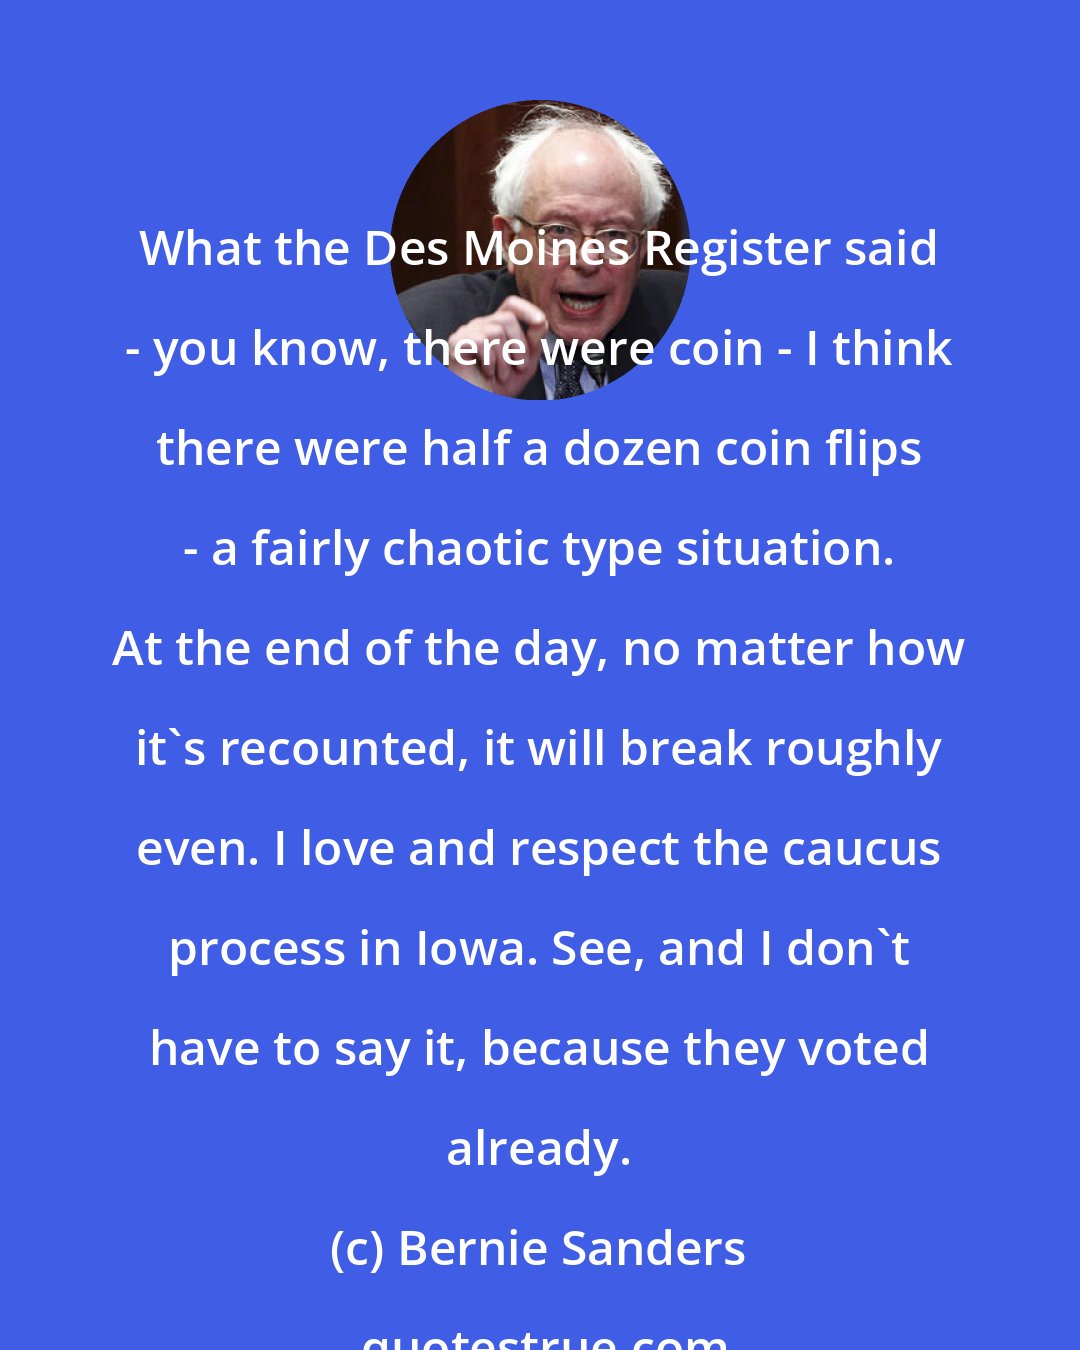 Bernie Sanders: What the Des Moines Register said - you know, there were coin - I think there were half a dozen coin flips - a fairly chaotic type situation. At the end of the day, no matter how it's recounted, it will break roughly even. I love and respect the caucus process in Iowa. See, and I don't have to say it, because they voted already.